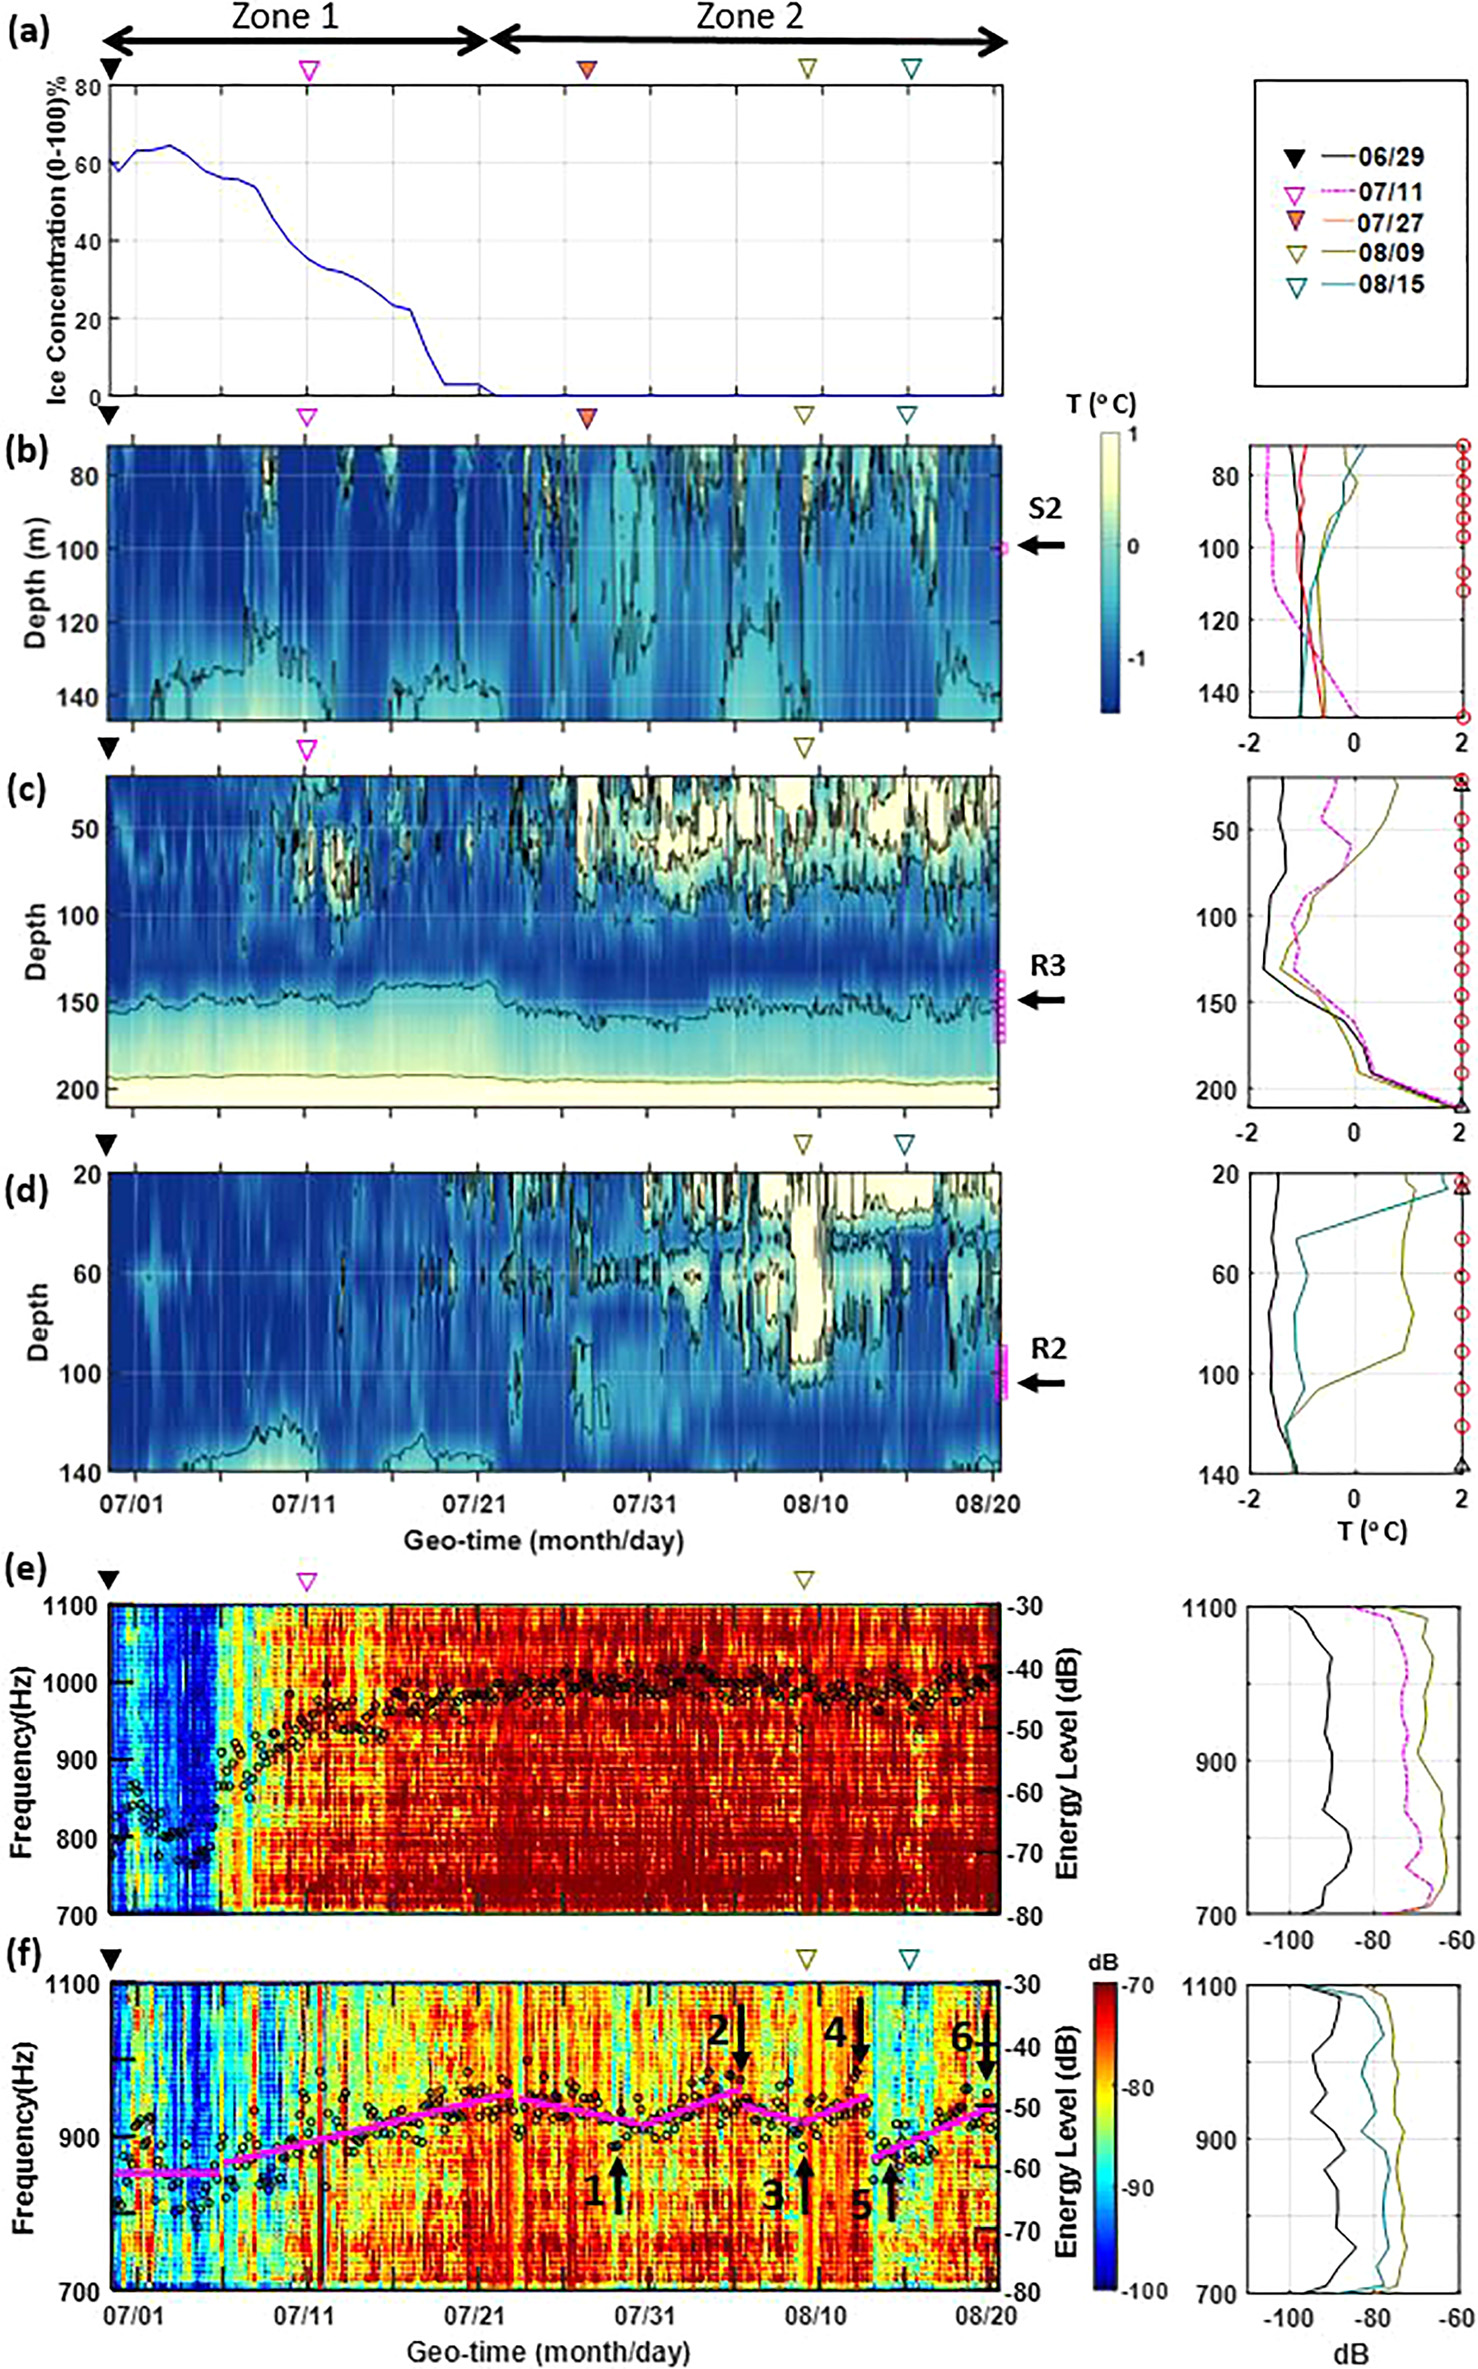 environmental and acoustic signals from CANAPE